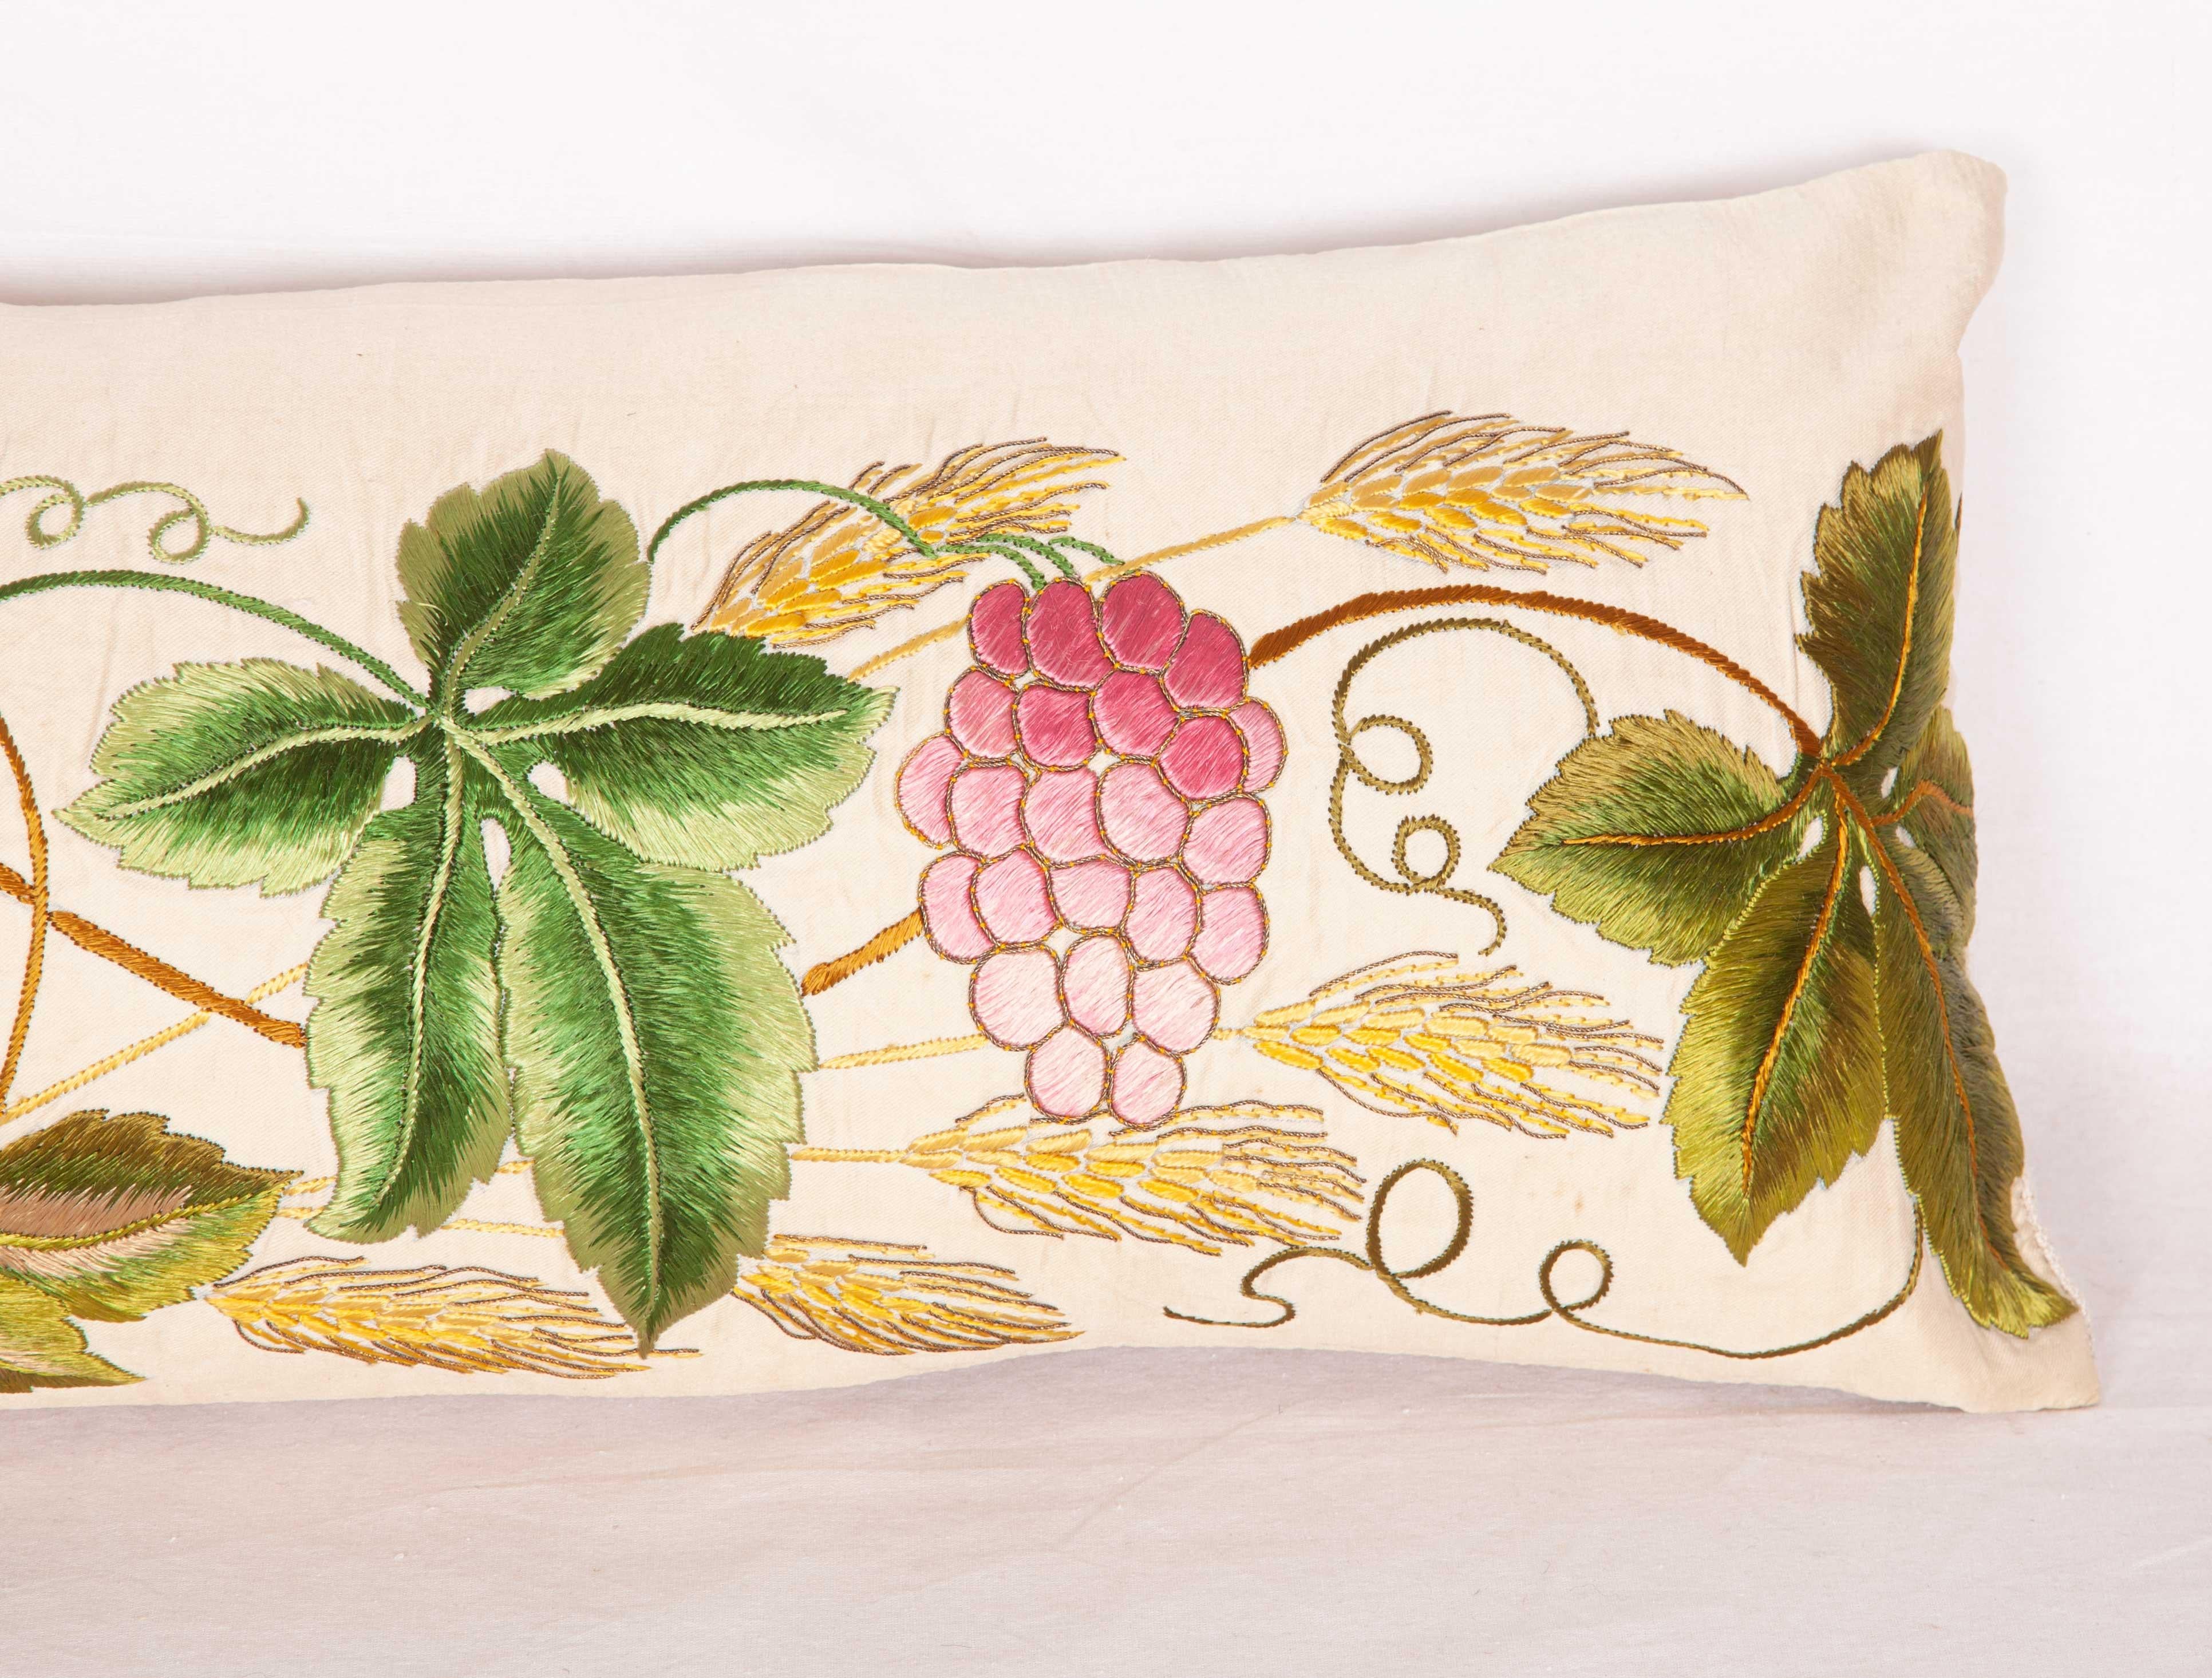 Embroidered Antique Lumbar Pillow Case Made from an 18th-19th Century, European Embroidery For Sale